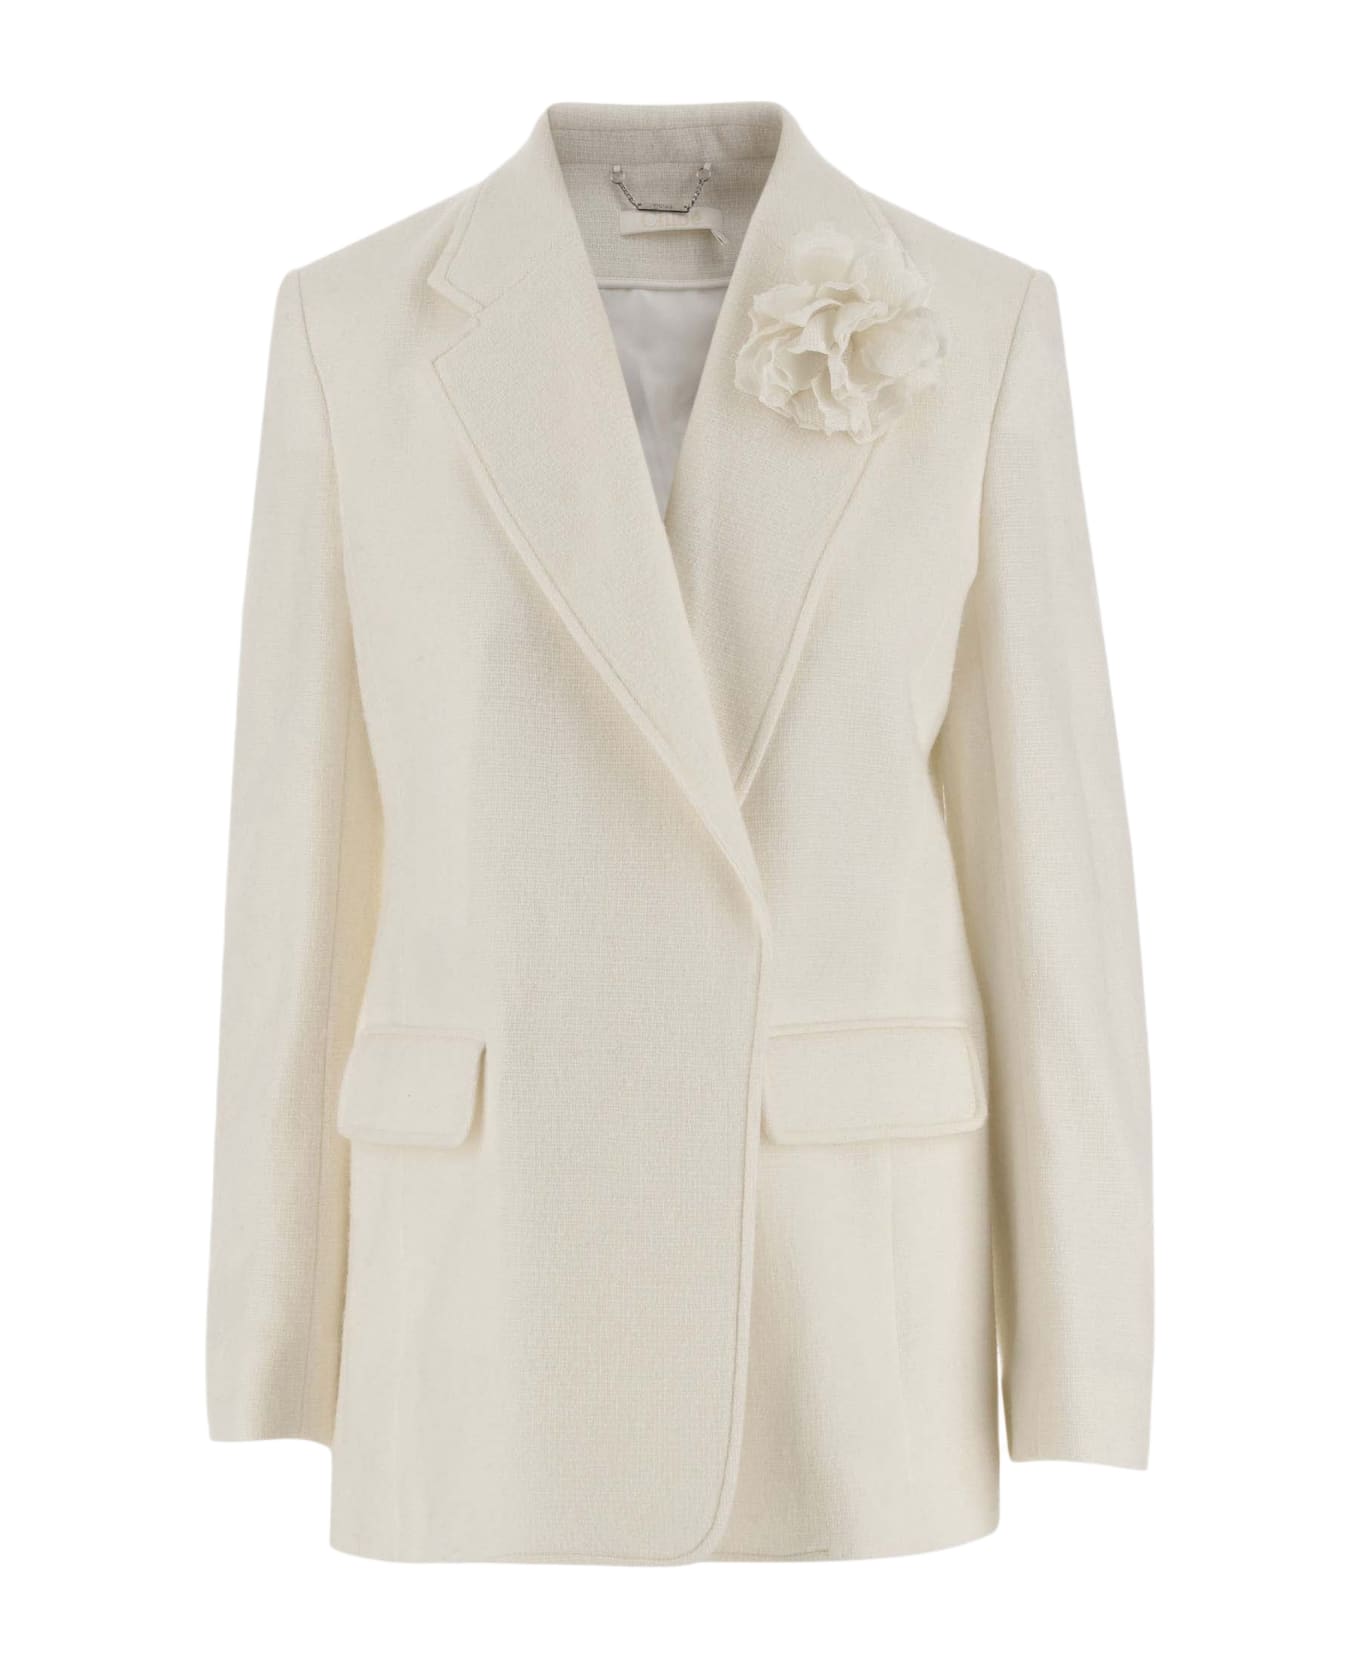 Chloé Wool And Cashmere Blend Jacket - White ブレザー